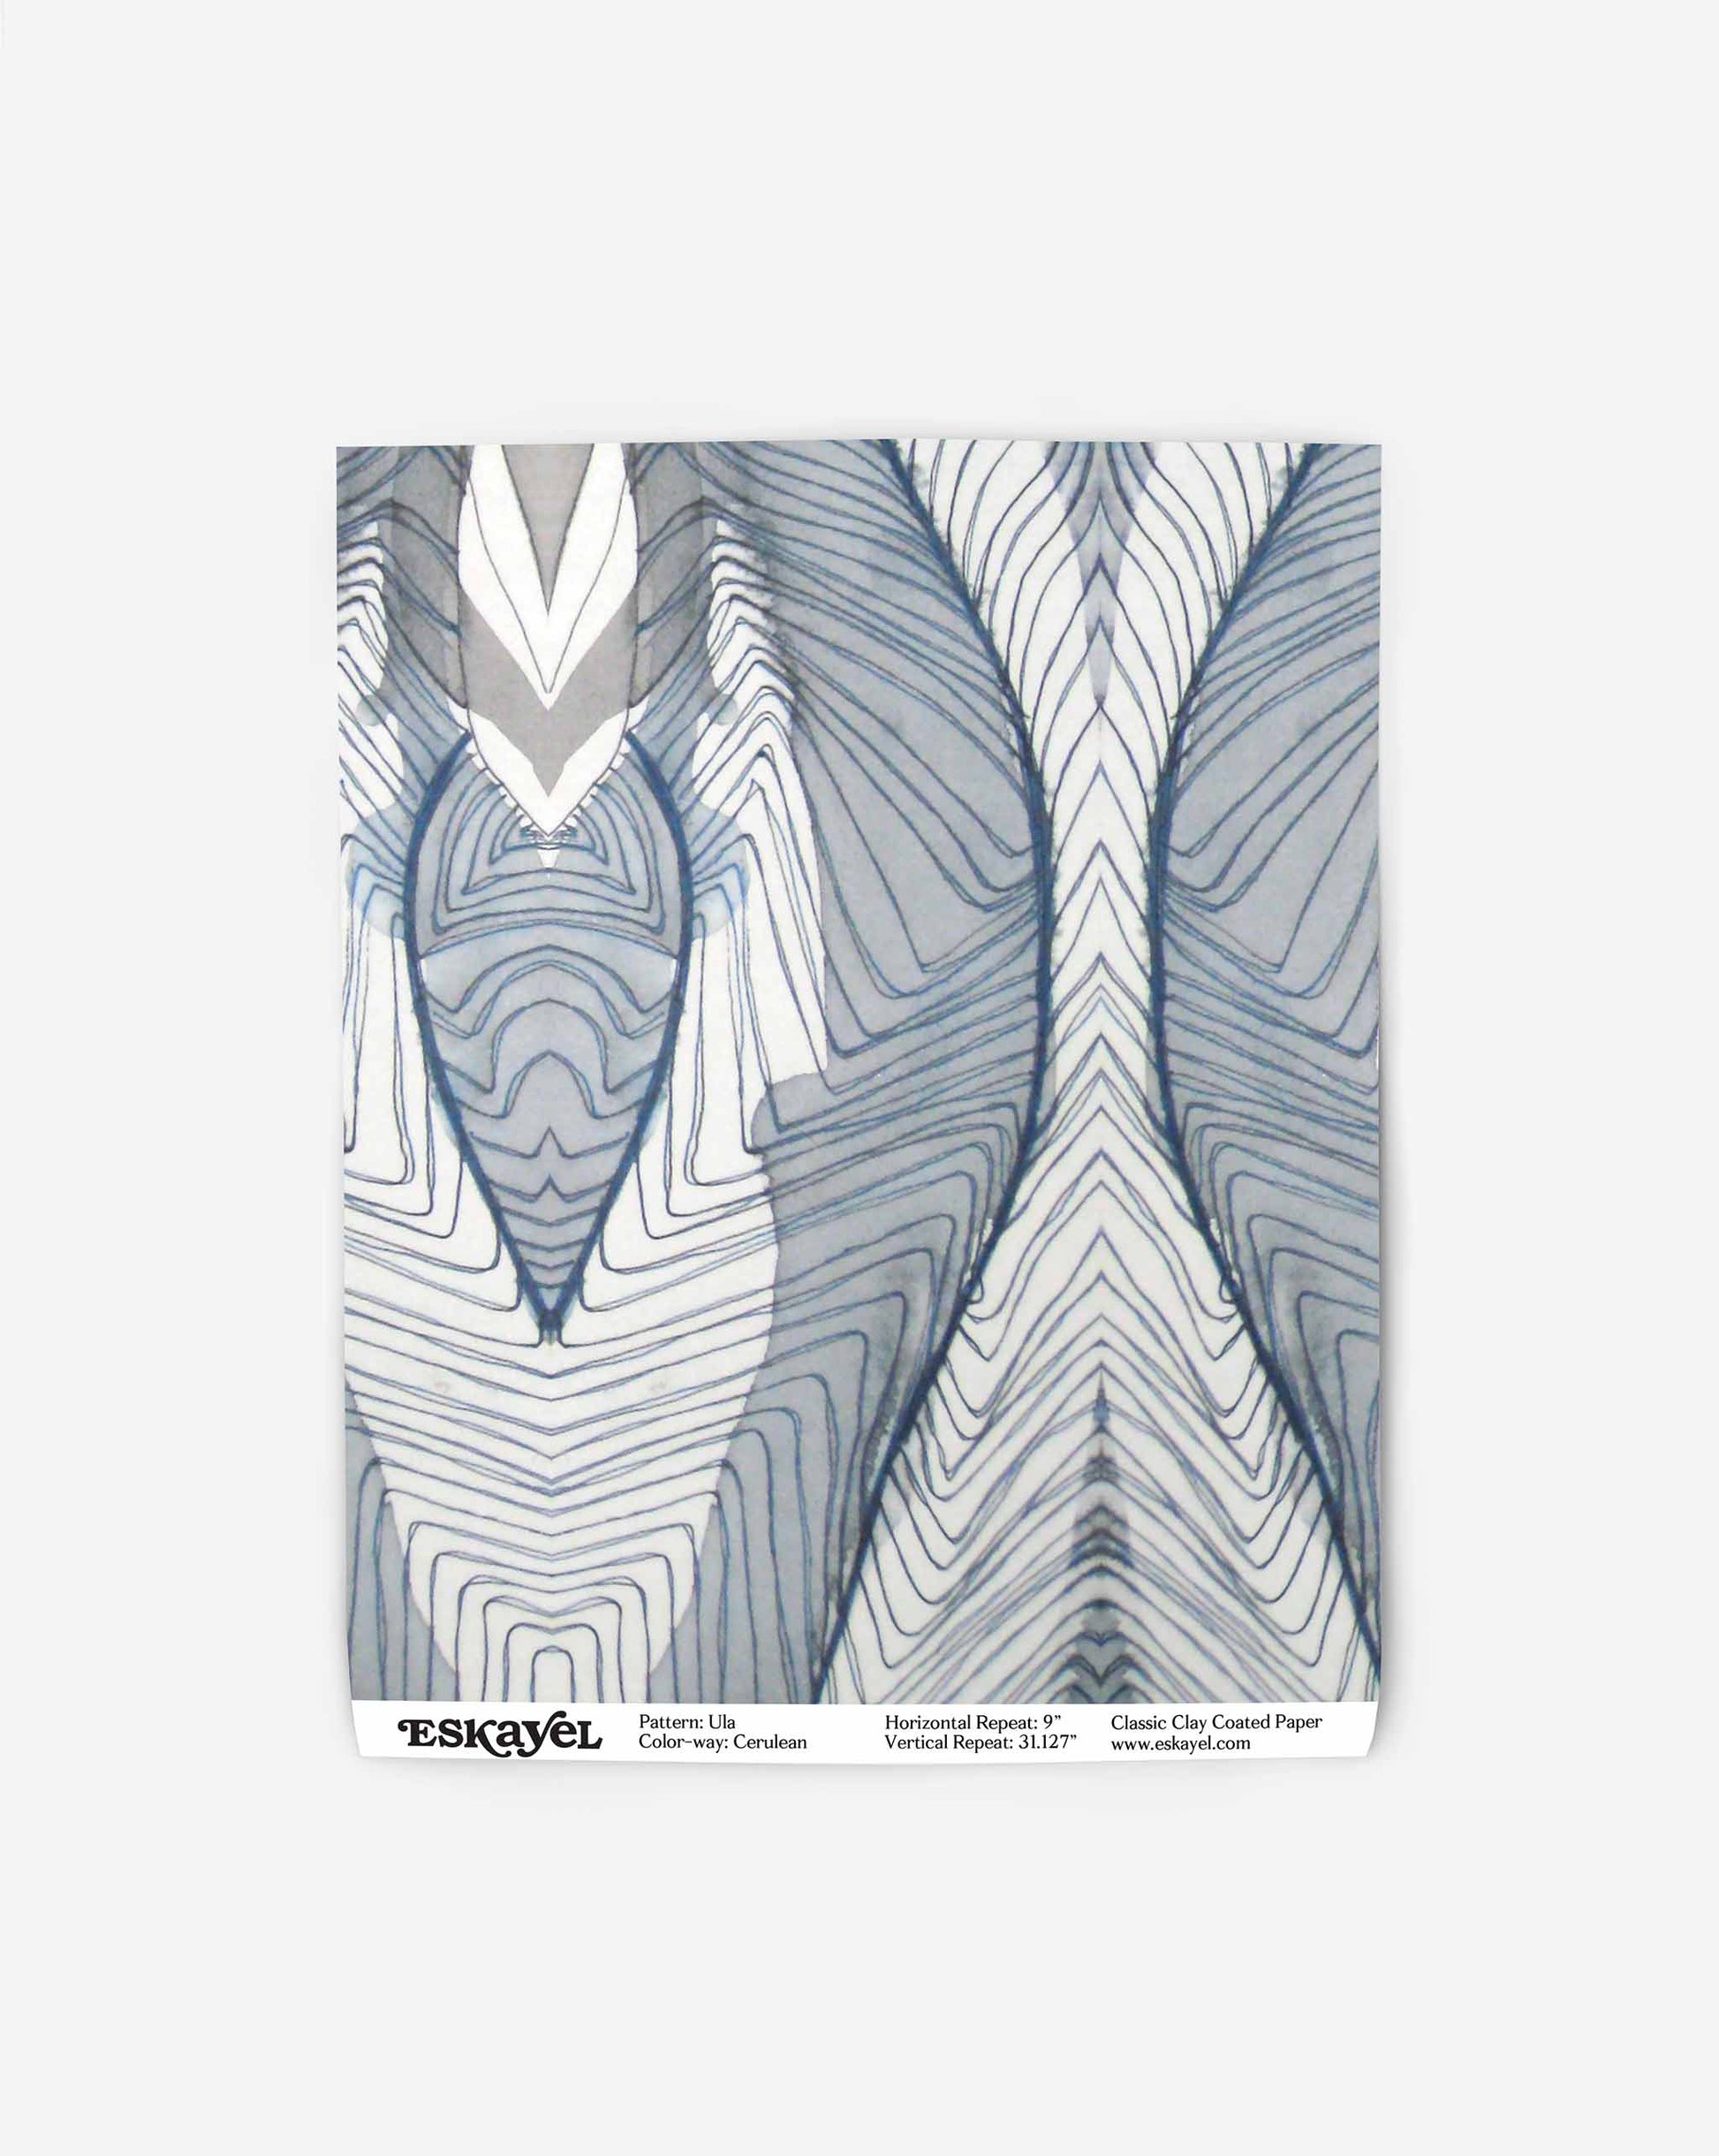 A blue and white abstract design on a swatch of wallpaper